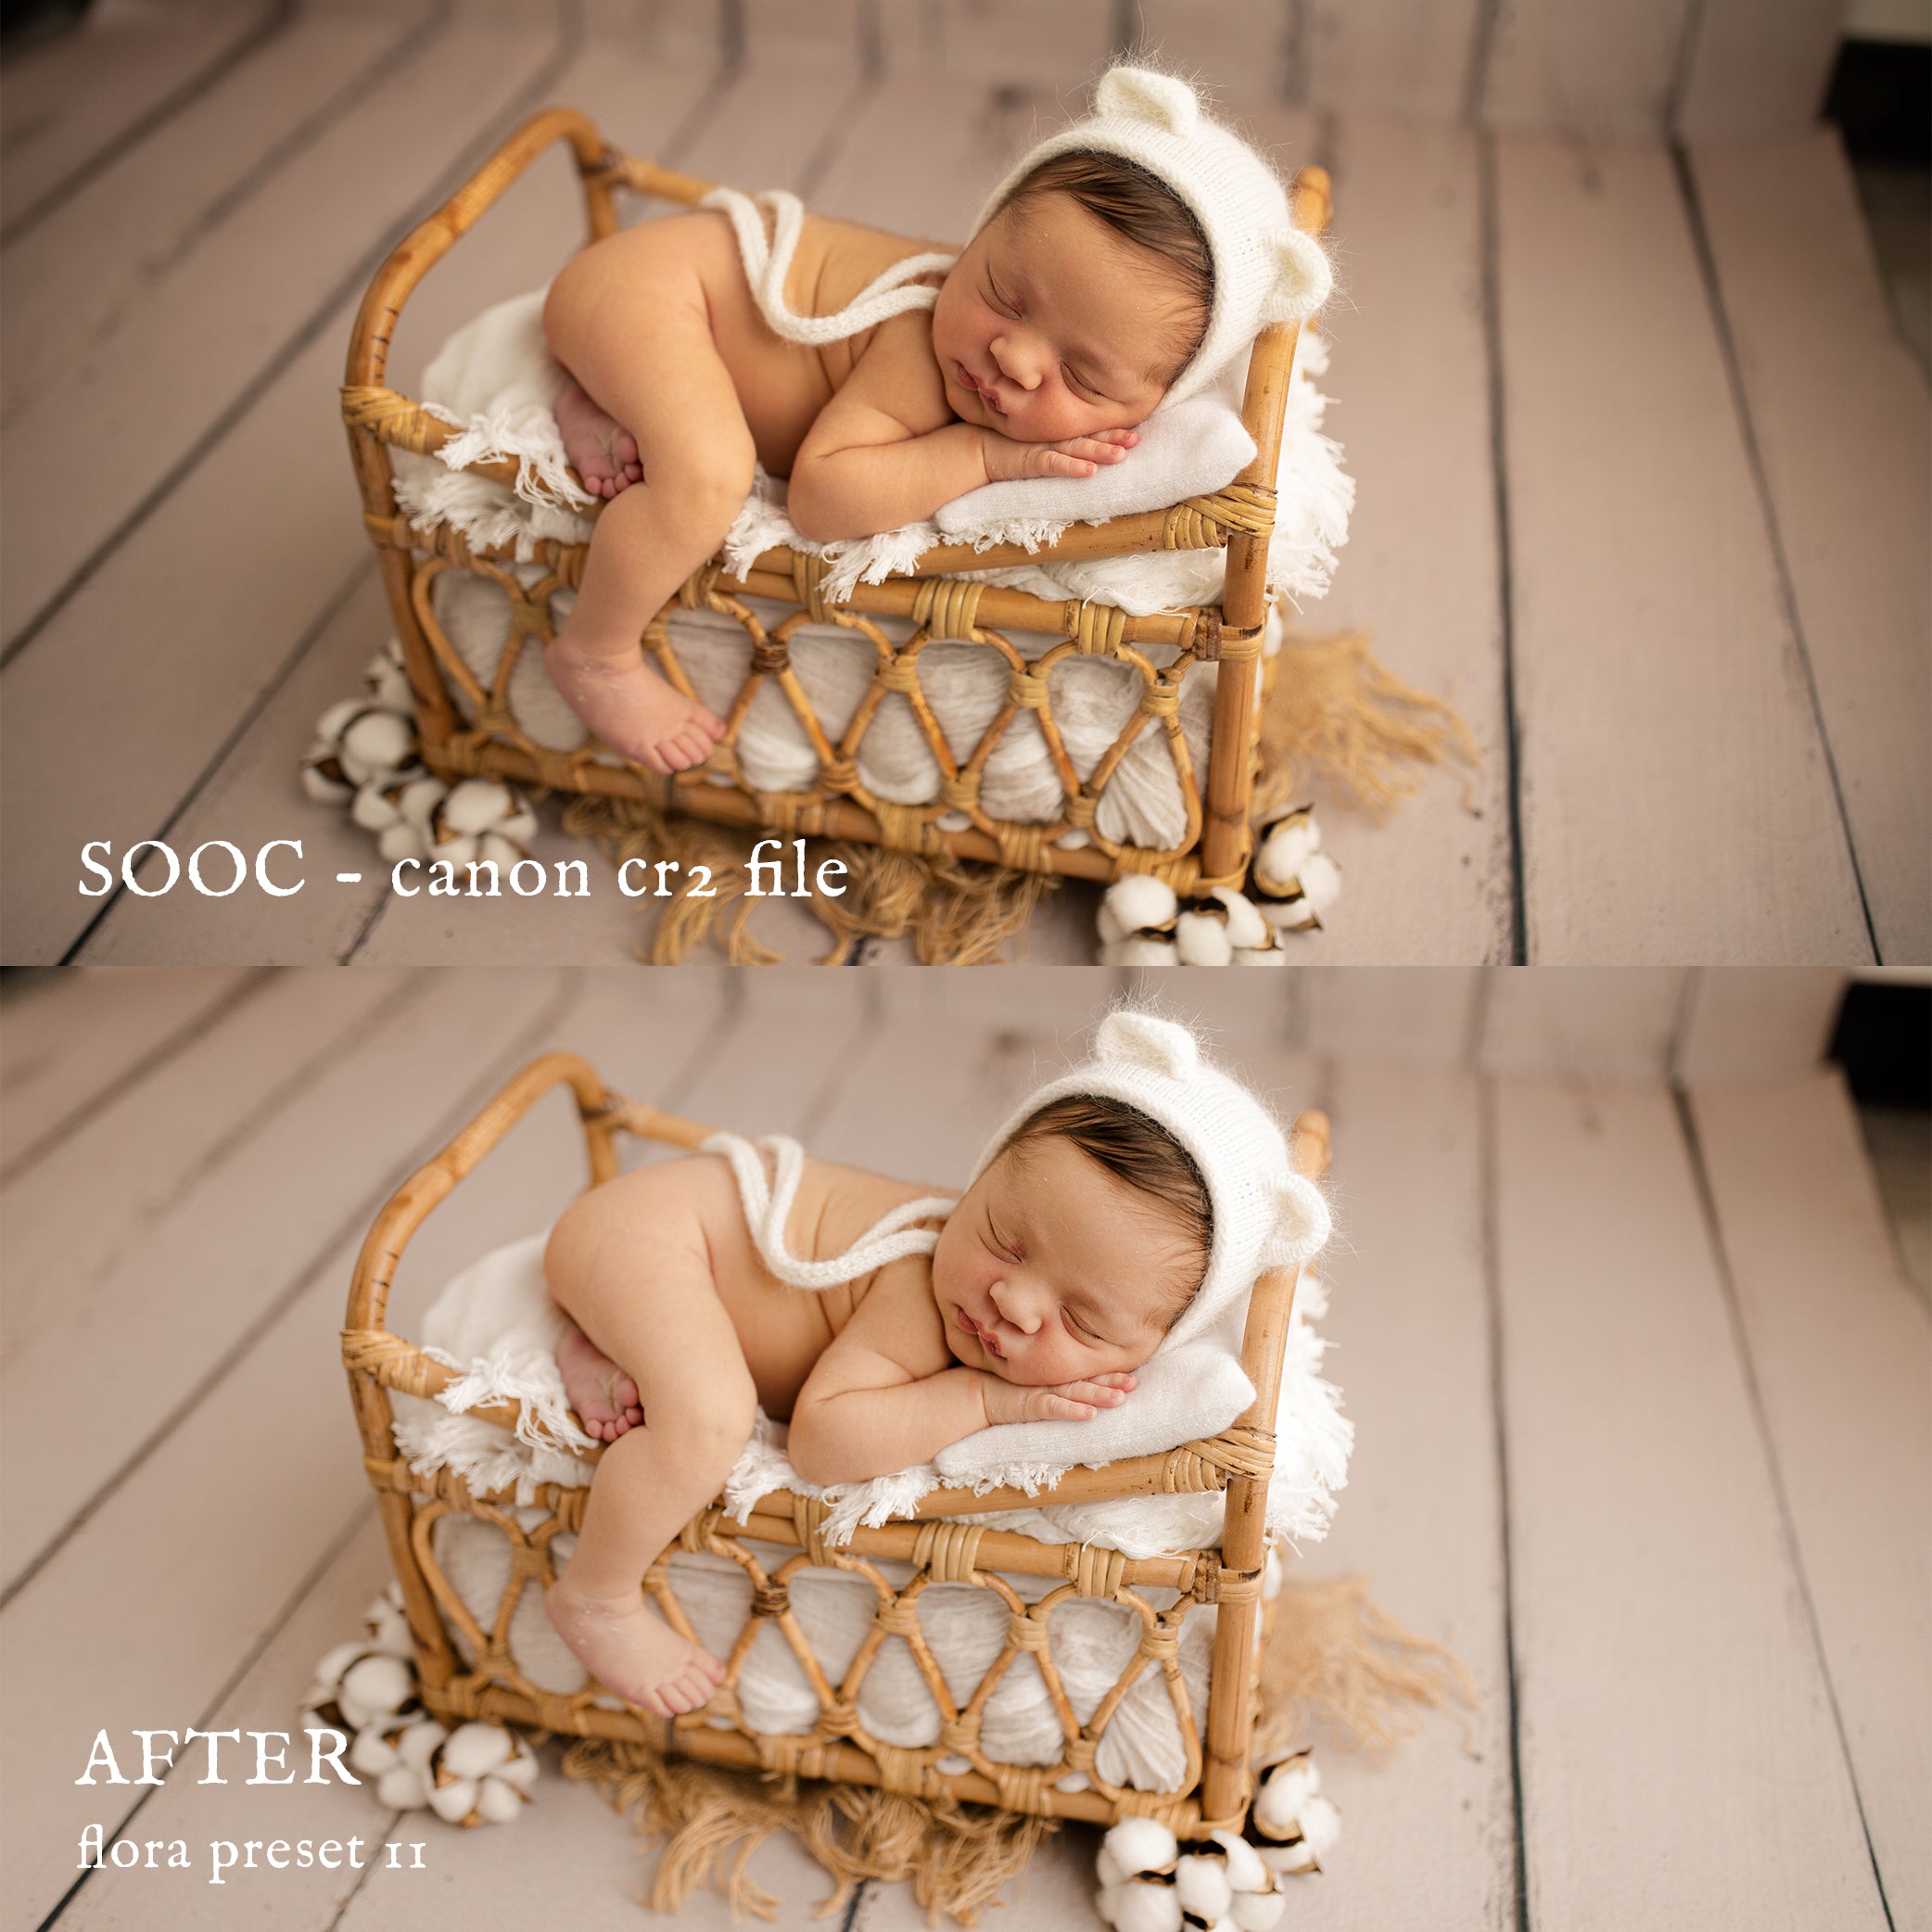 Newborn Photography Lightroom Presets for Newborn Baby & Maternity Photographers Cake Smash Presets for Lightroom Newborn Lightroom Presets & Newborn Photoshop Actions by Jessica G. Photography